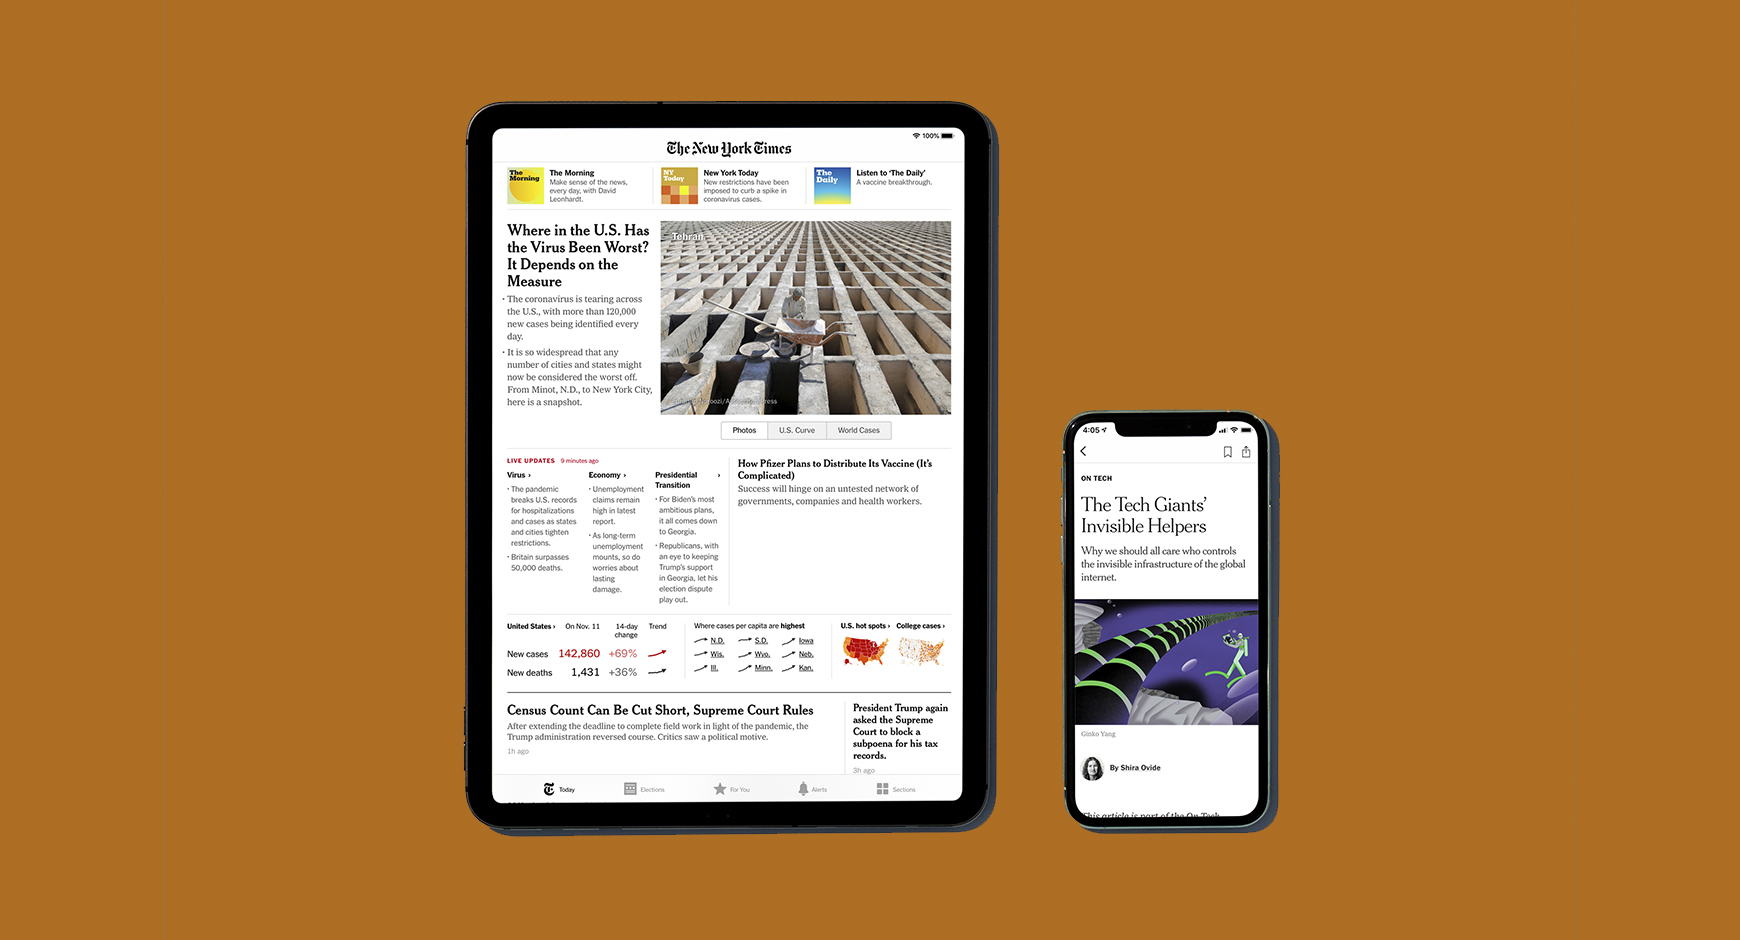 tablet and smartphone on burnt orange field with New York Times website on their screens